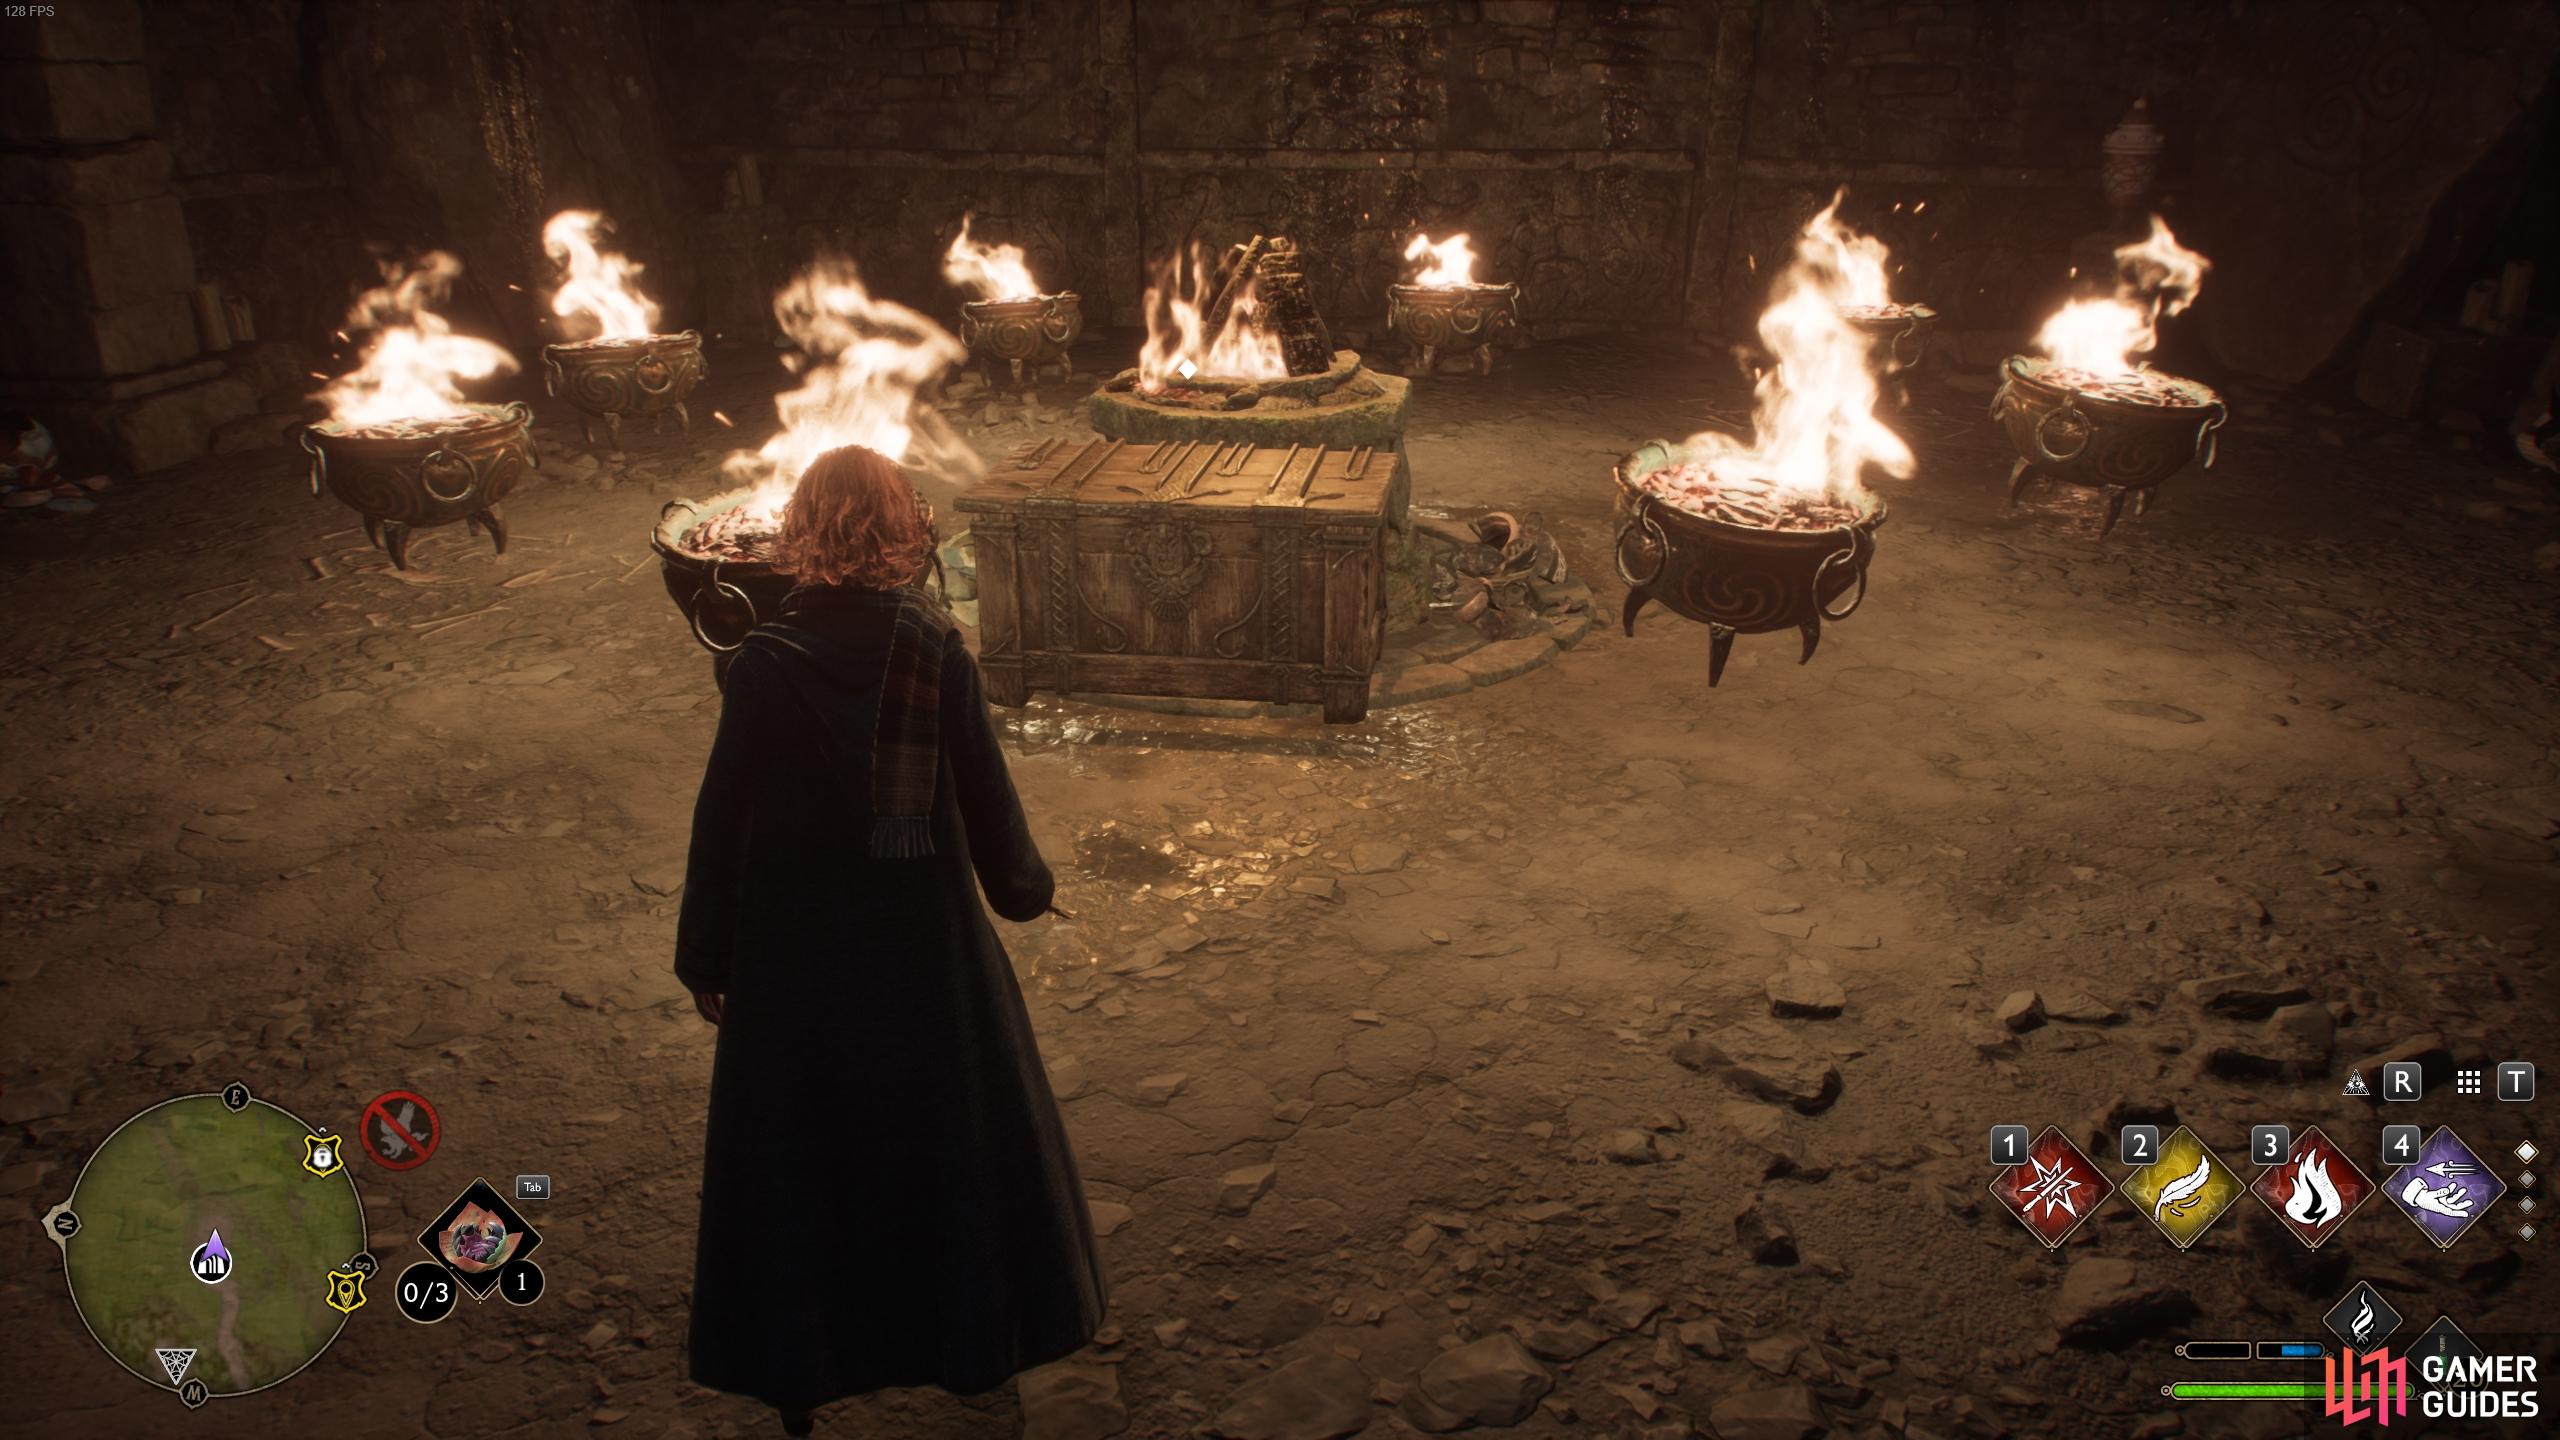 Use a fire based spell to light all the braziers and reveal the treasure chest.